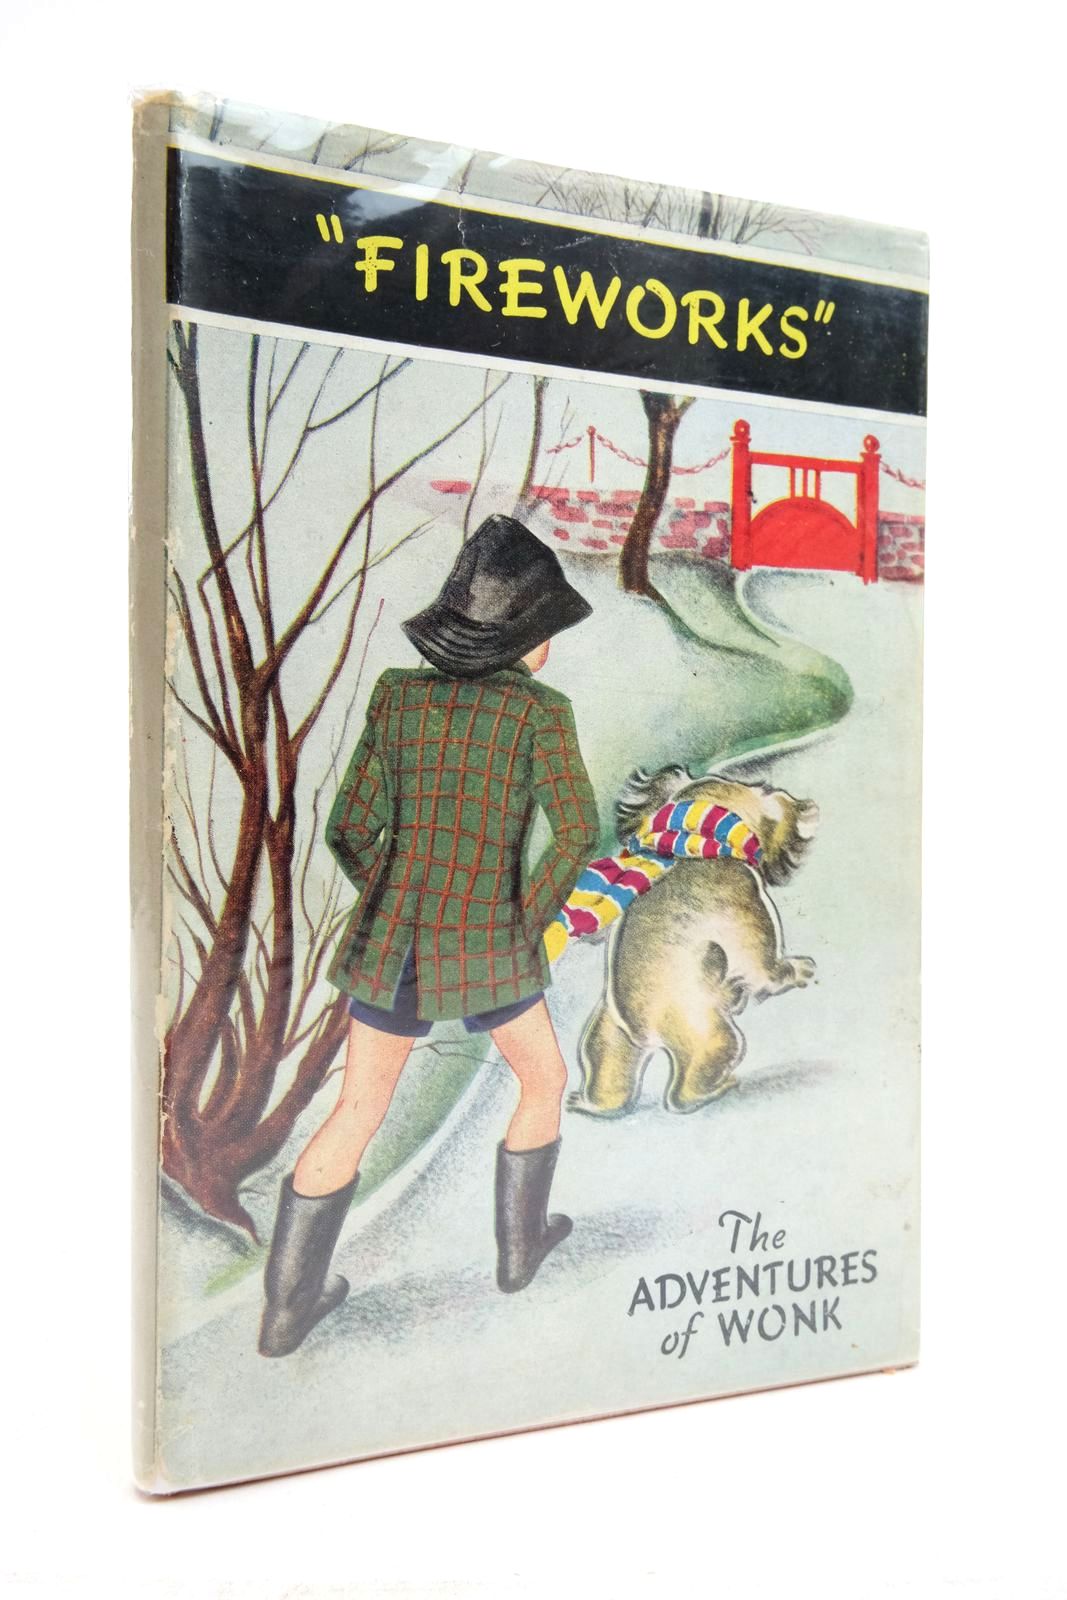 Photo of THE ADVENTURES OF WONK - FIREWORKS written by Levy, Muriel illustrated by Kiddell-Monroe, Joan published by Wills & Hepworth Ltd. (STOCK CODE: 2136915)  for sale by Stella & Rose's Books